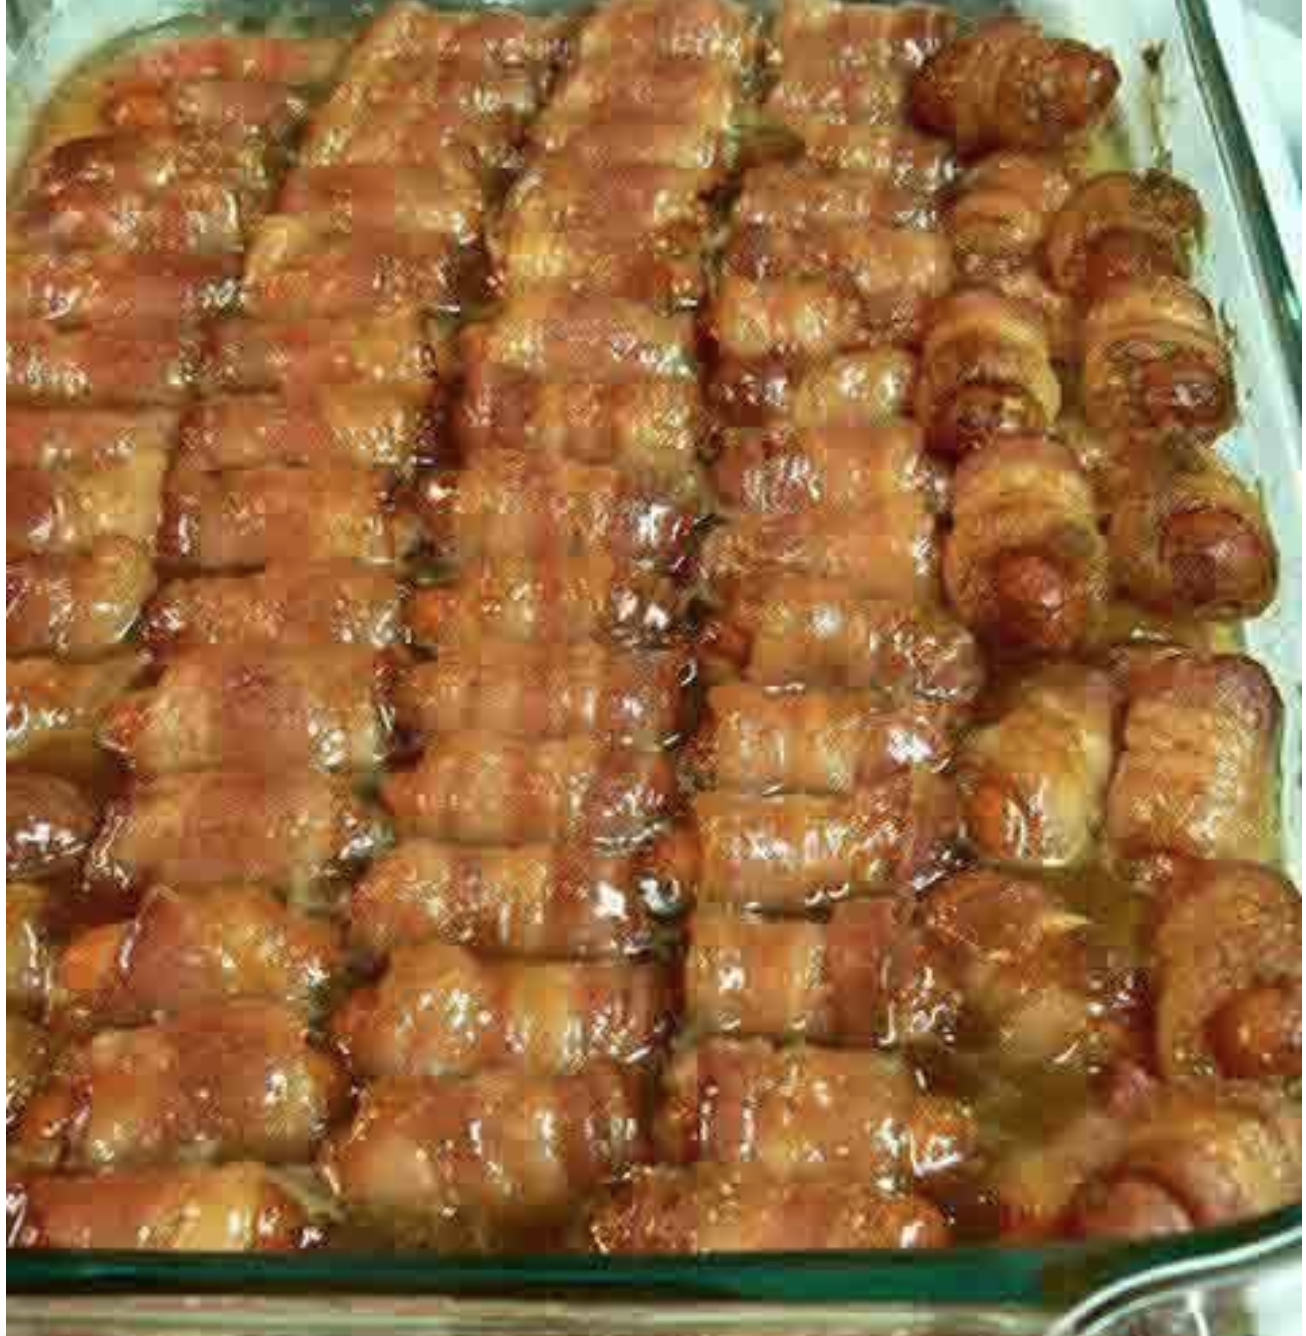 BACON WRAPPED SMOKIES WITH BROWN SUGAR AND BUTTER